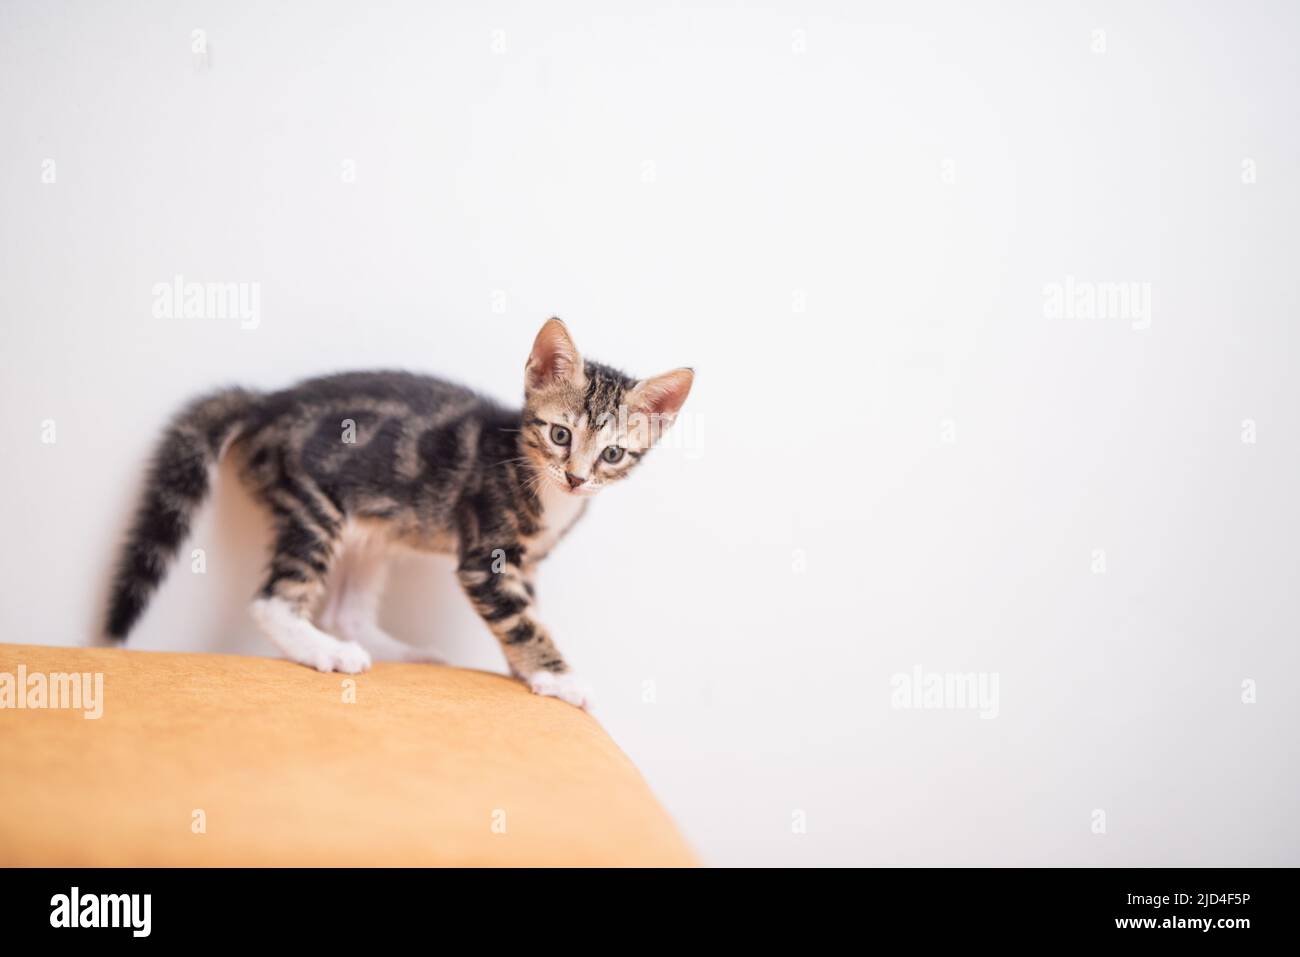 Tabby kitten with fluffed up tail scared portrait Stock Photo